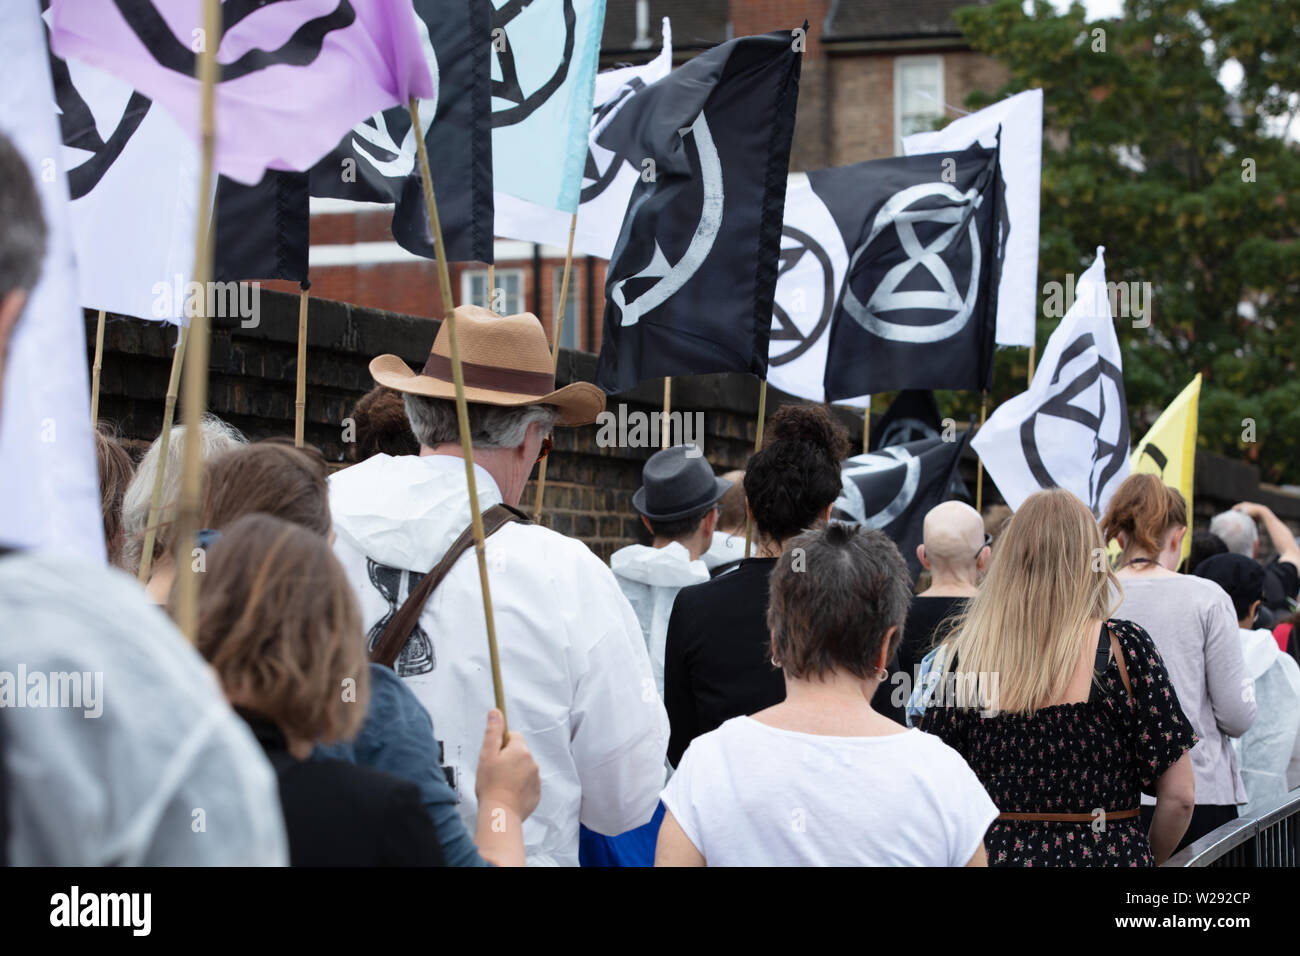 London, UK. 2nd July 2019. Extinction Rebellion Arts and Culture Group creating a silent procession to and theatre in front of several fossil fuel companies. The protest play is based on Bizet's opera Carmen, with real life actors and an opera singer. Credit: Joe Kuis / Alamy News Stock Photo